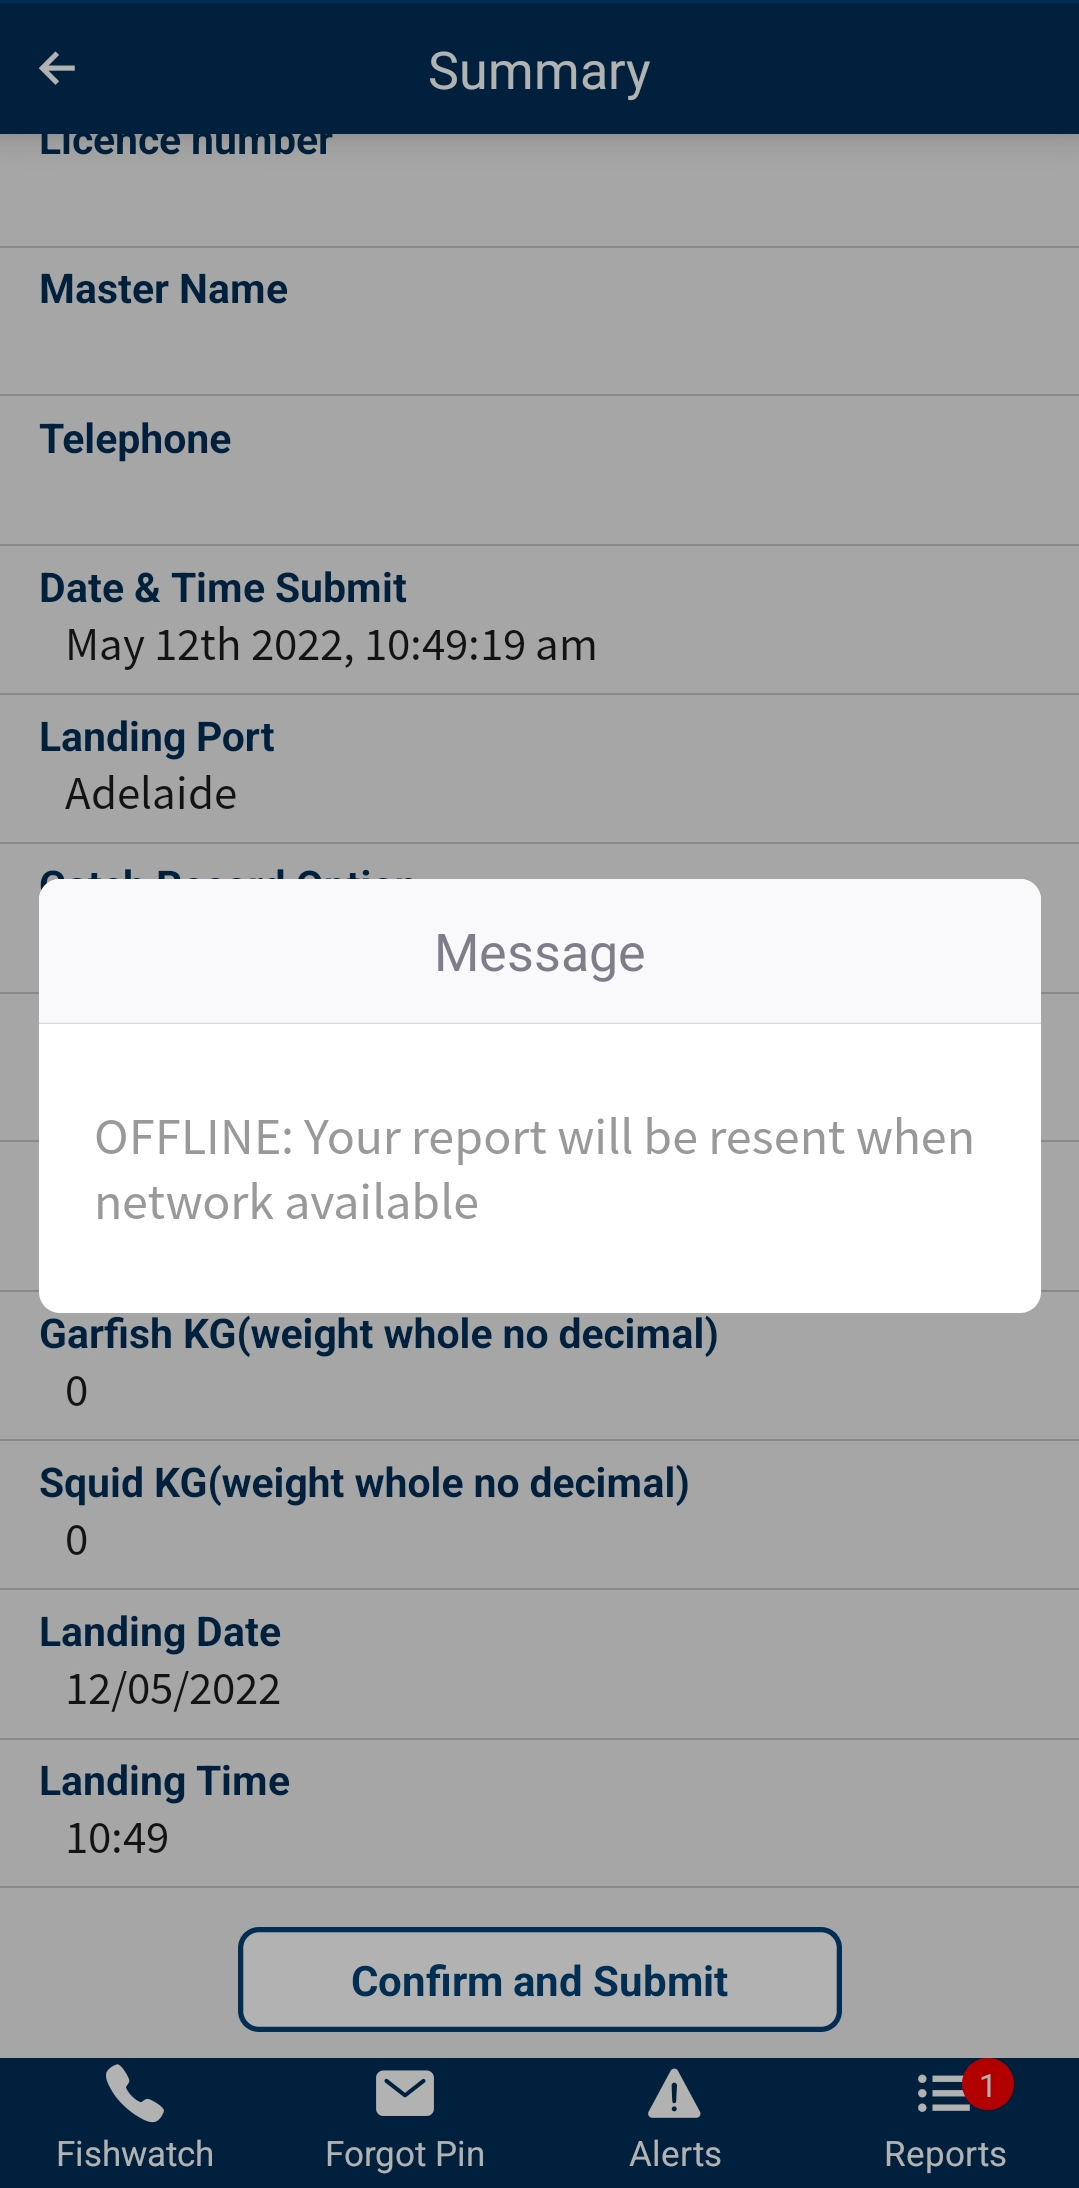 A capture from the app showing a report in the background and an alert message which reads: Message. Offline: Your report will be resent when network available.